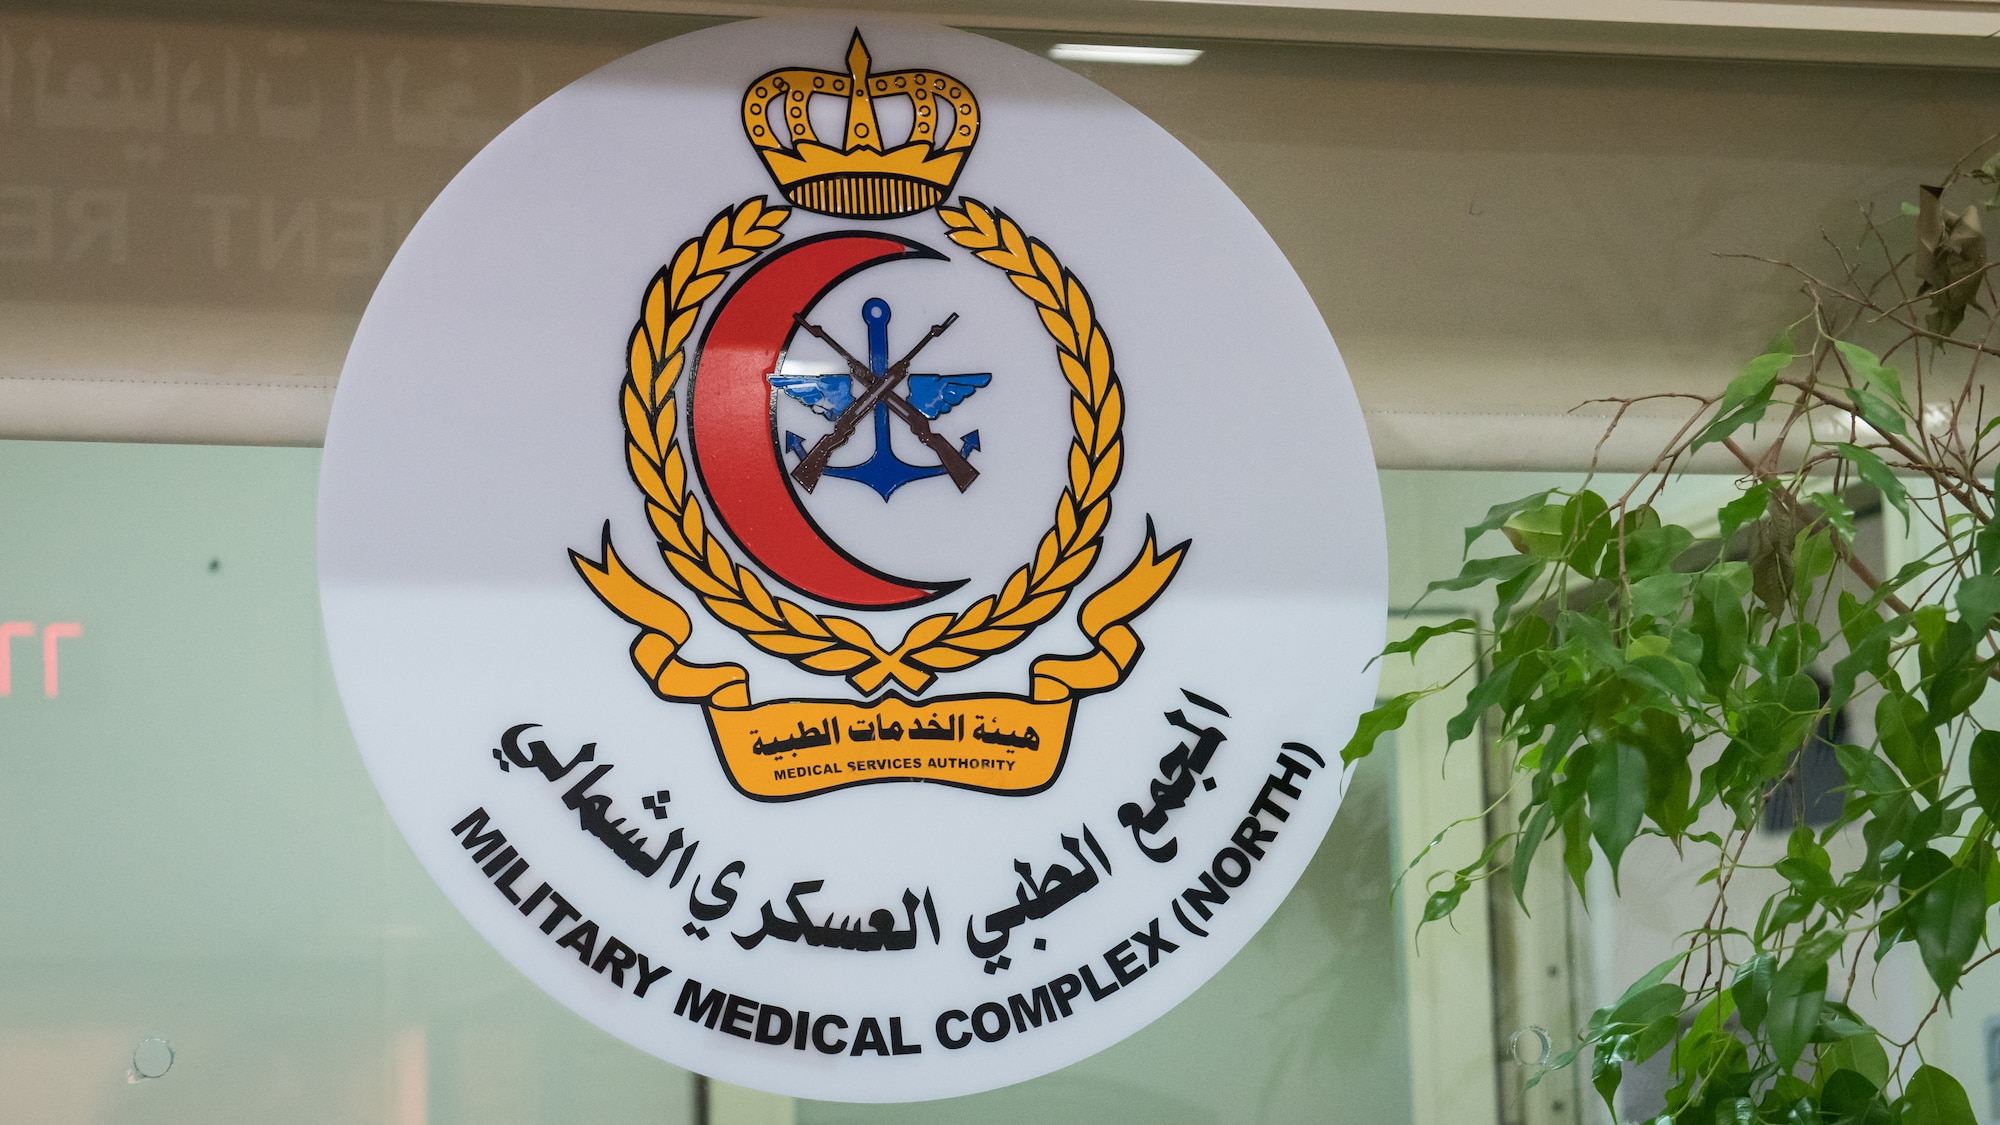 A sign for the Kuwaiti army's North Military Medical Complex is displayed in a waiting room at the facility in Al Jahra, Kuwait, Nov. 7, 2019. Kuwaiti army medics and facility leaders hosted Airmen from the 386th Expeditionary Medical Group providing a tour of the facility and inviting them to take part in a presentation for a continuiting medical education exchange. (U.S. Air Force photo by Tech. Sgt. Daniel Martinez)